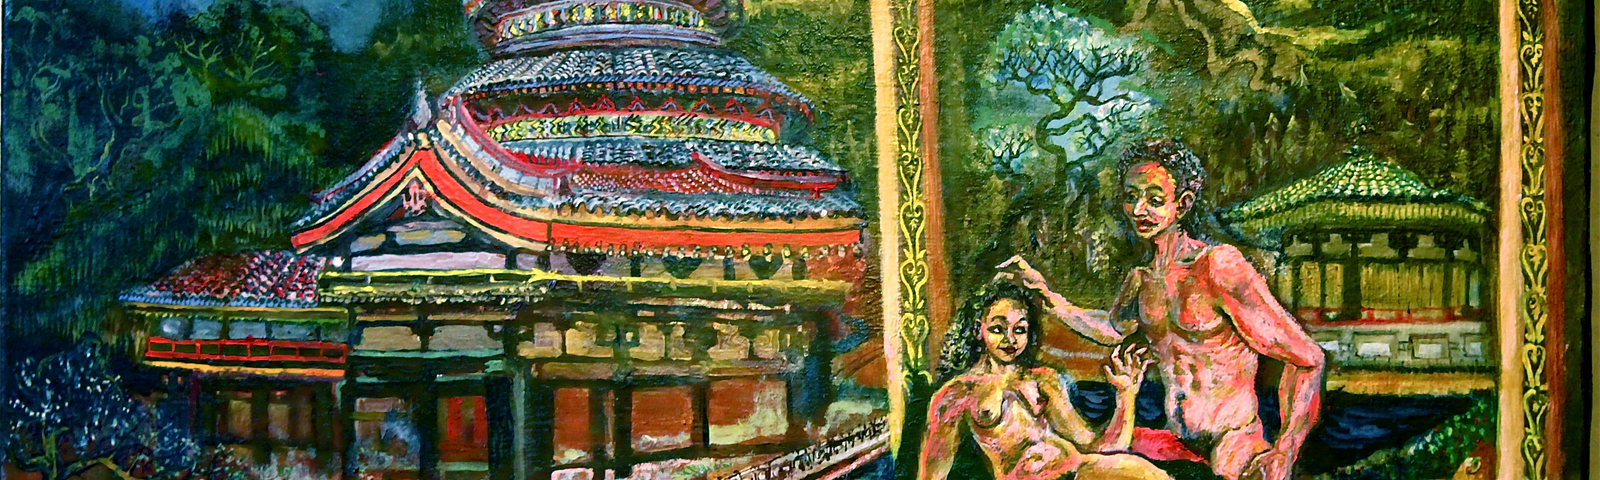 Painting of nude man and woman in Kubla Khan’s Pleasure Dome